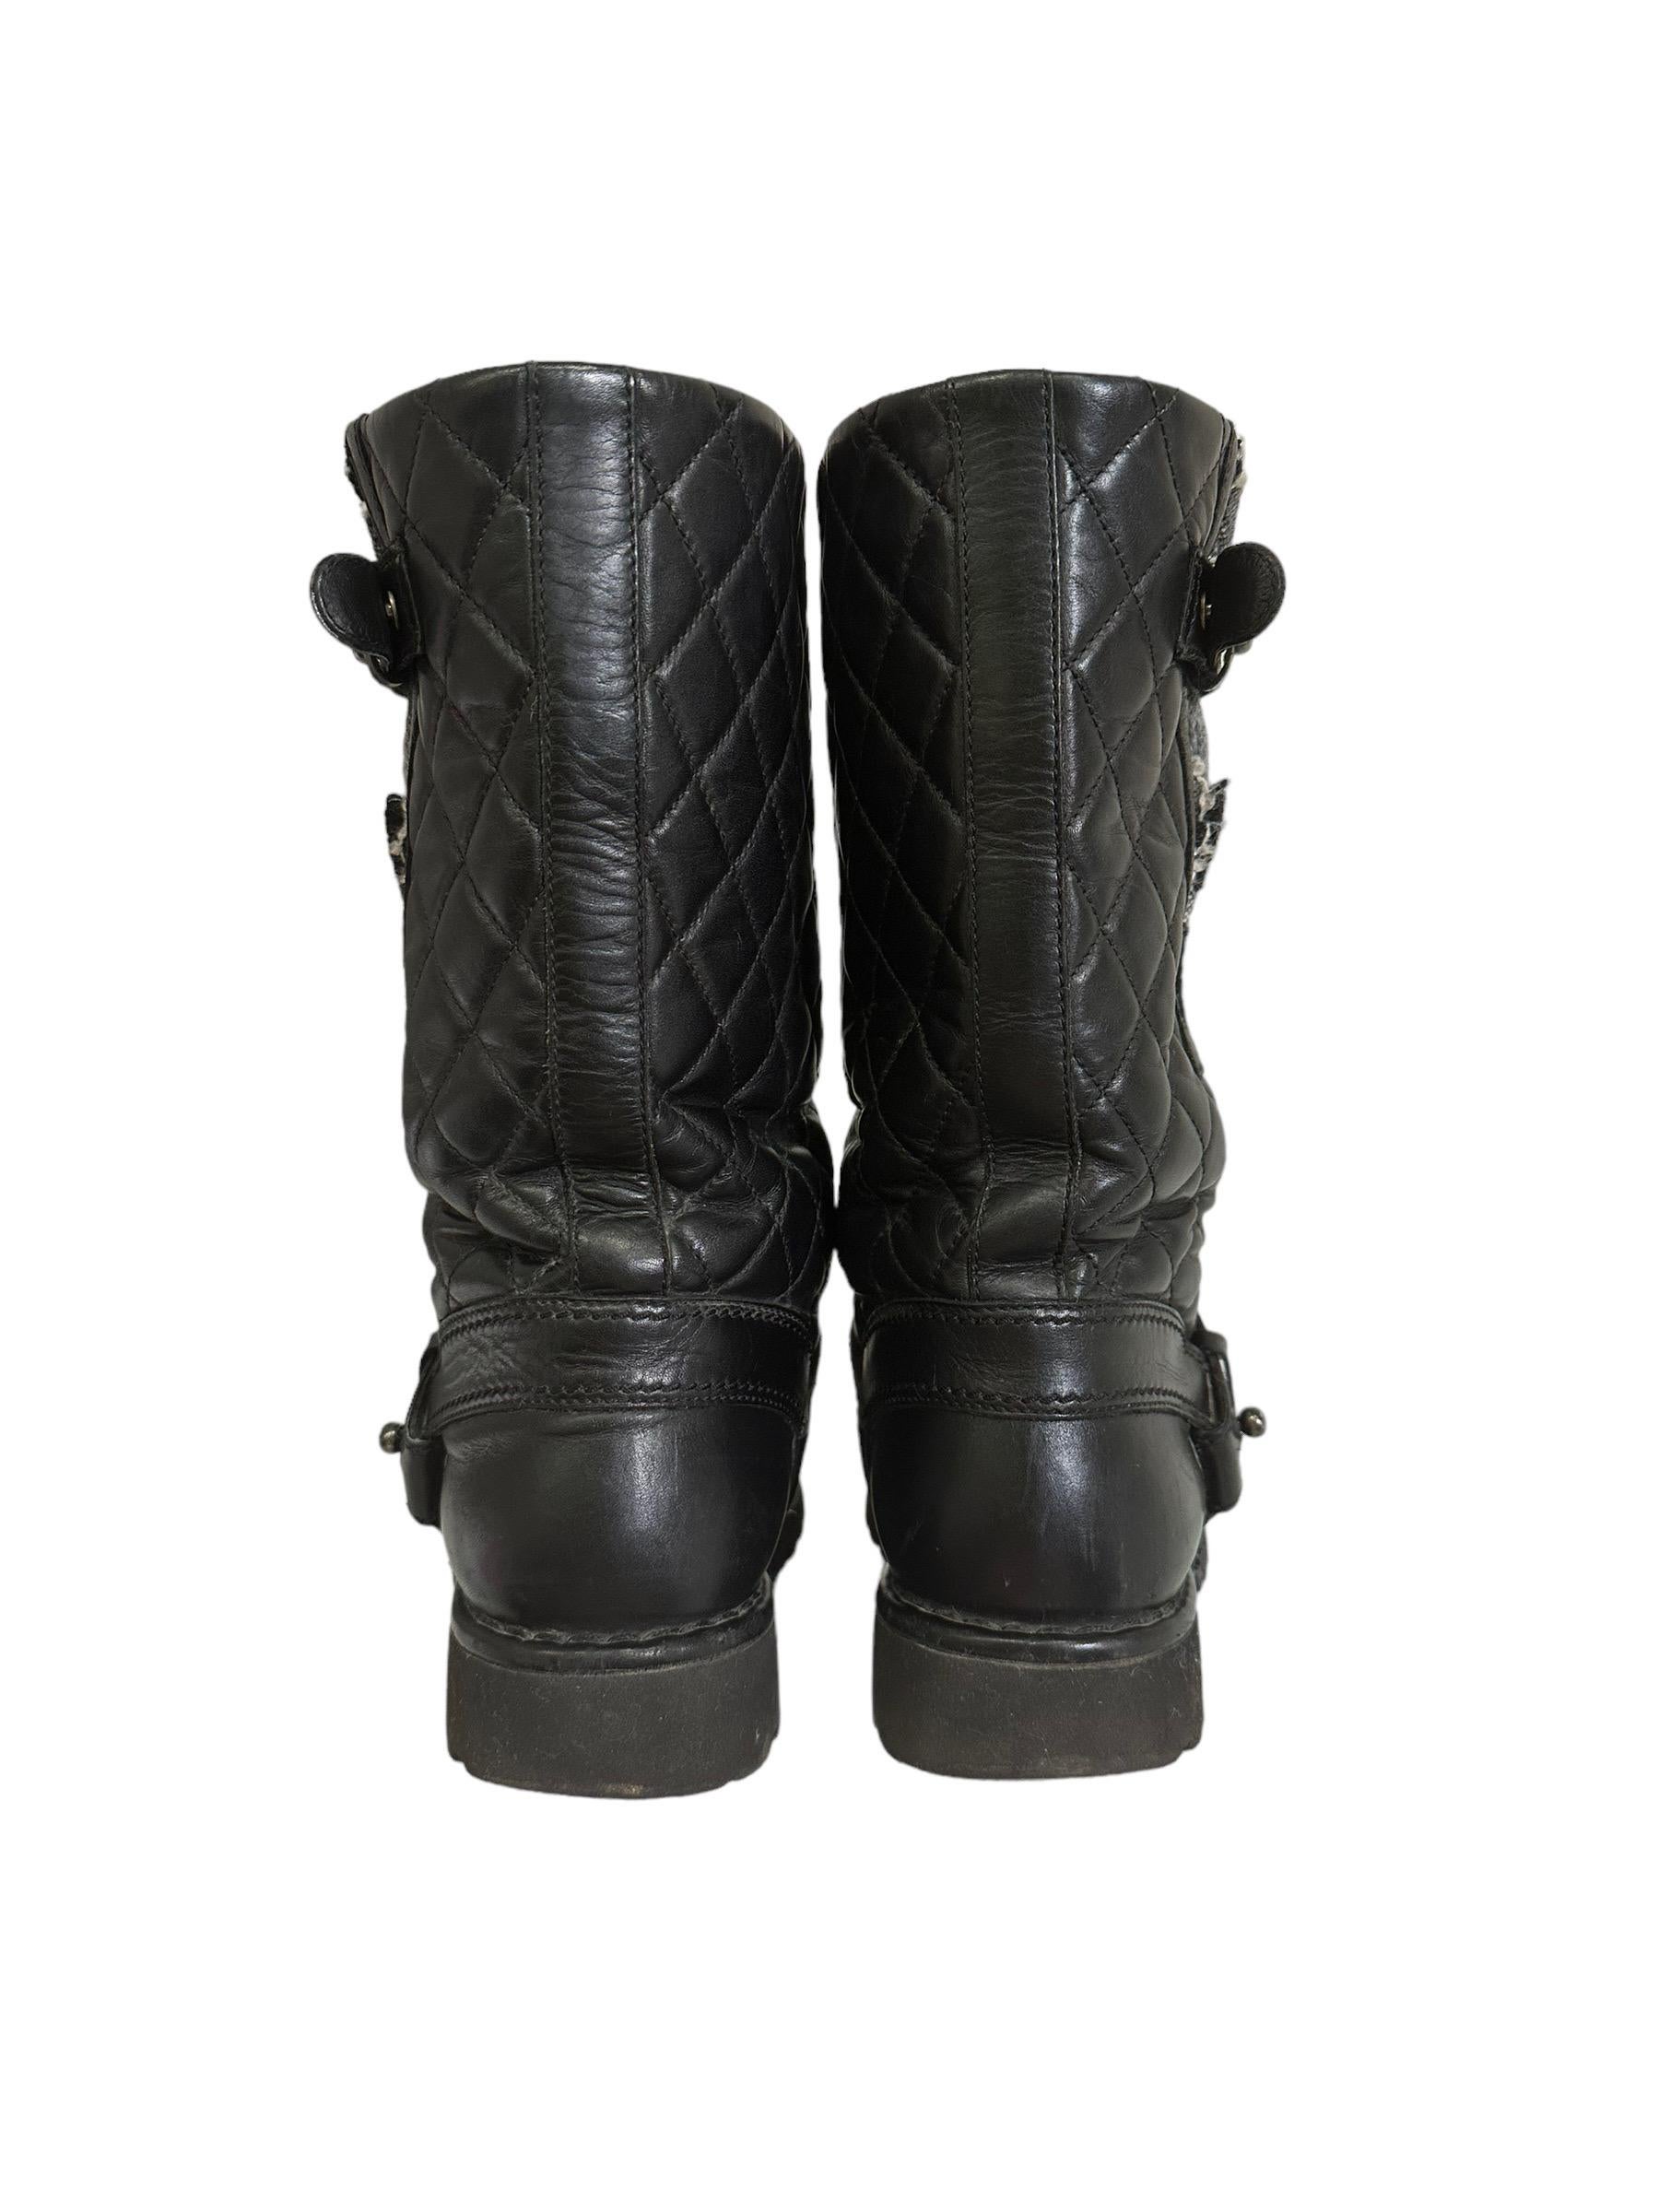 Chanel Biker Boots Black Leather Tweed For Sale 2